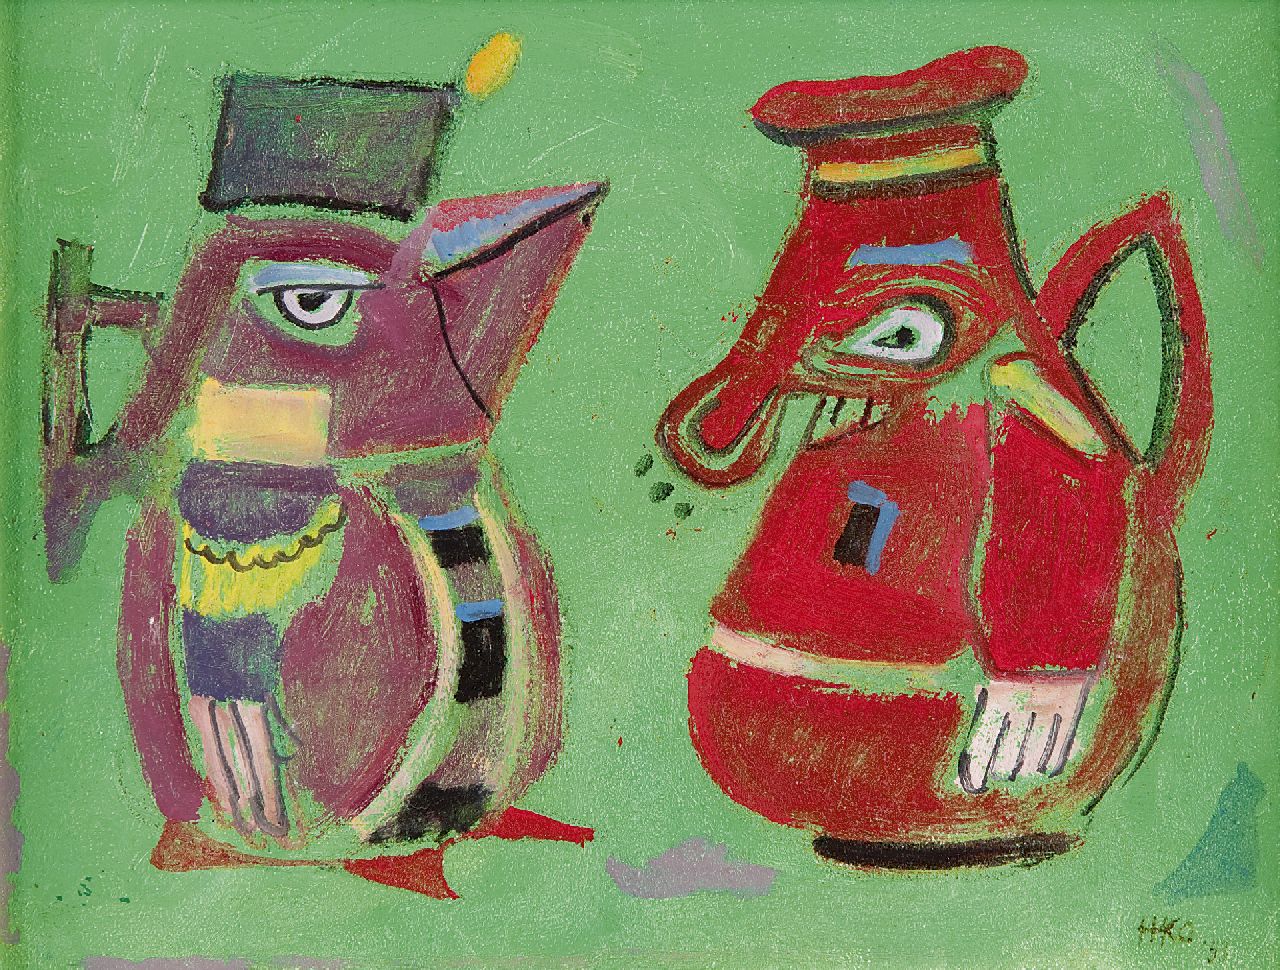 Kamerlingh Onnes H.H.  | 'Harm' Henrick Kamerlingh Onnes, The cupbearers, oil on board 18.5 x 24.3 cm, signed l.r. with monogram and dated '53